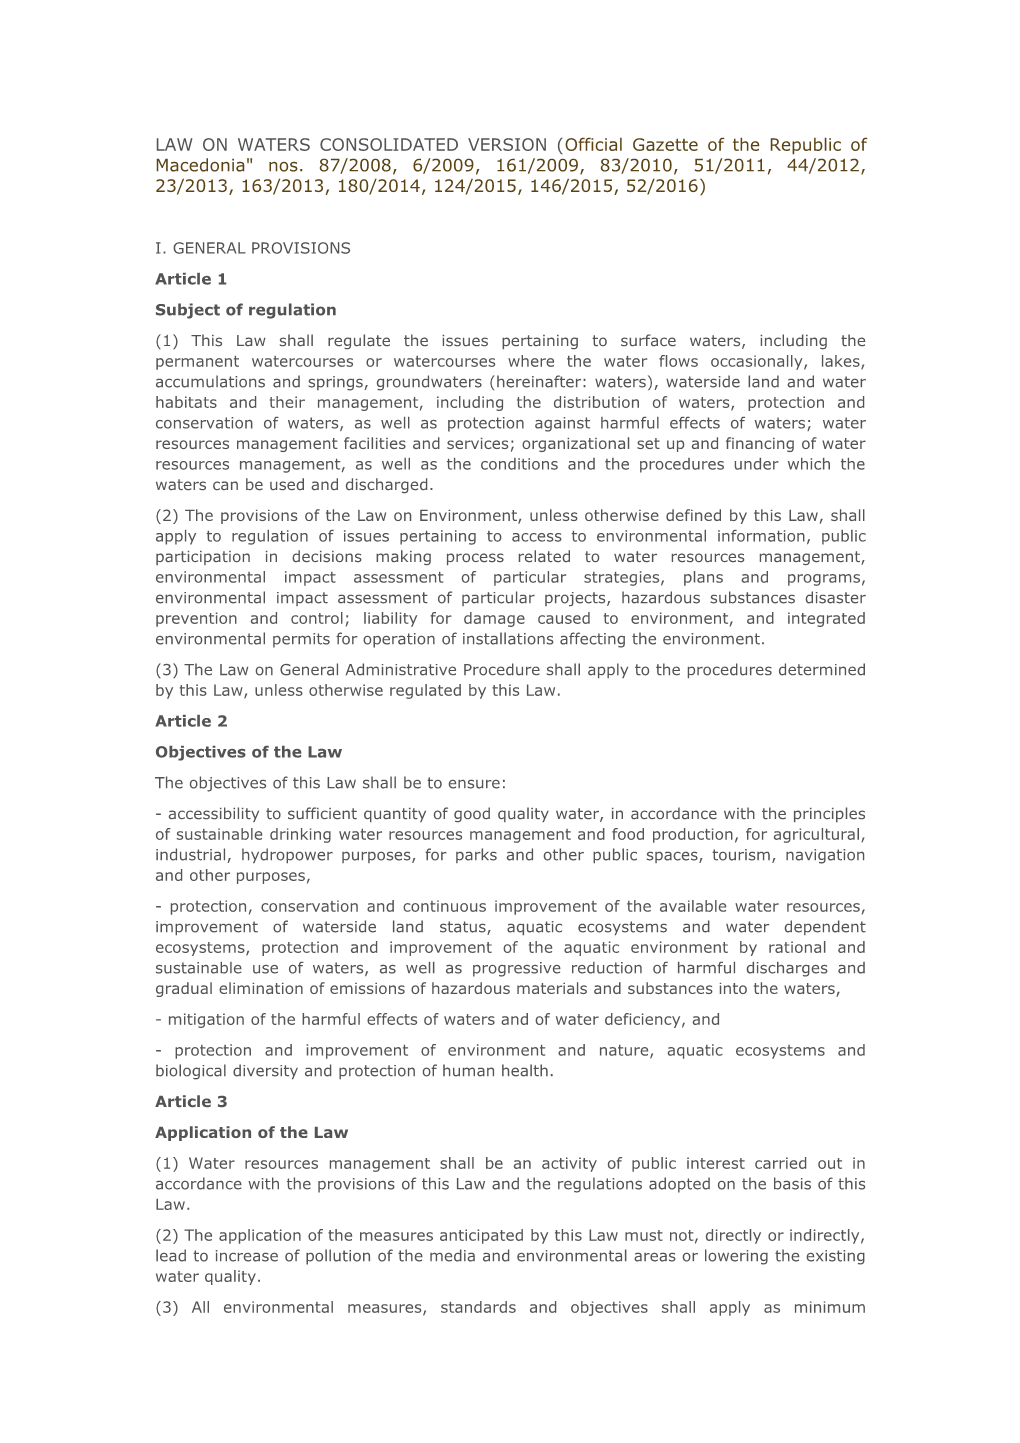 LAW on WATERS CONSOLIDATED VERSION (Official Gazette of the Republic of Macedonia Nos